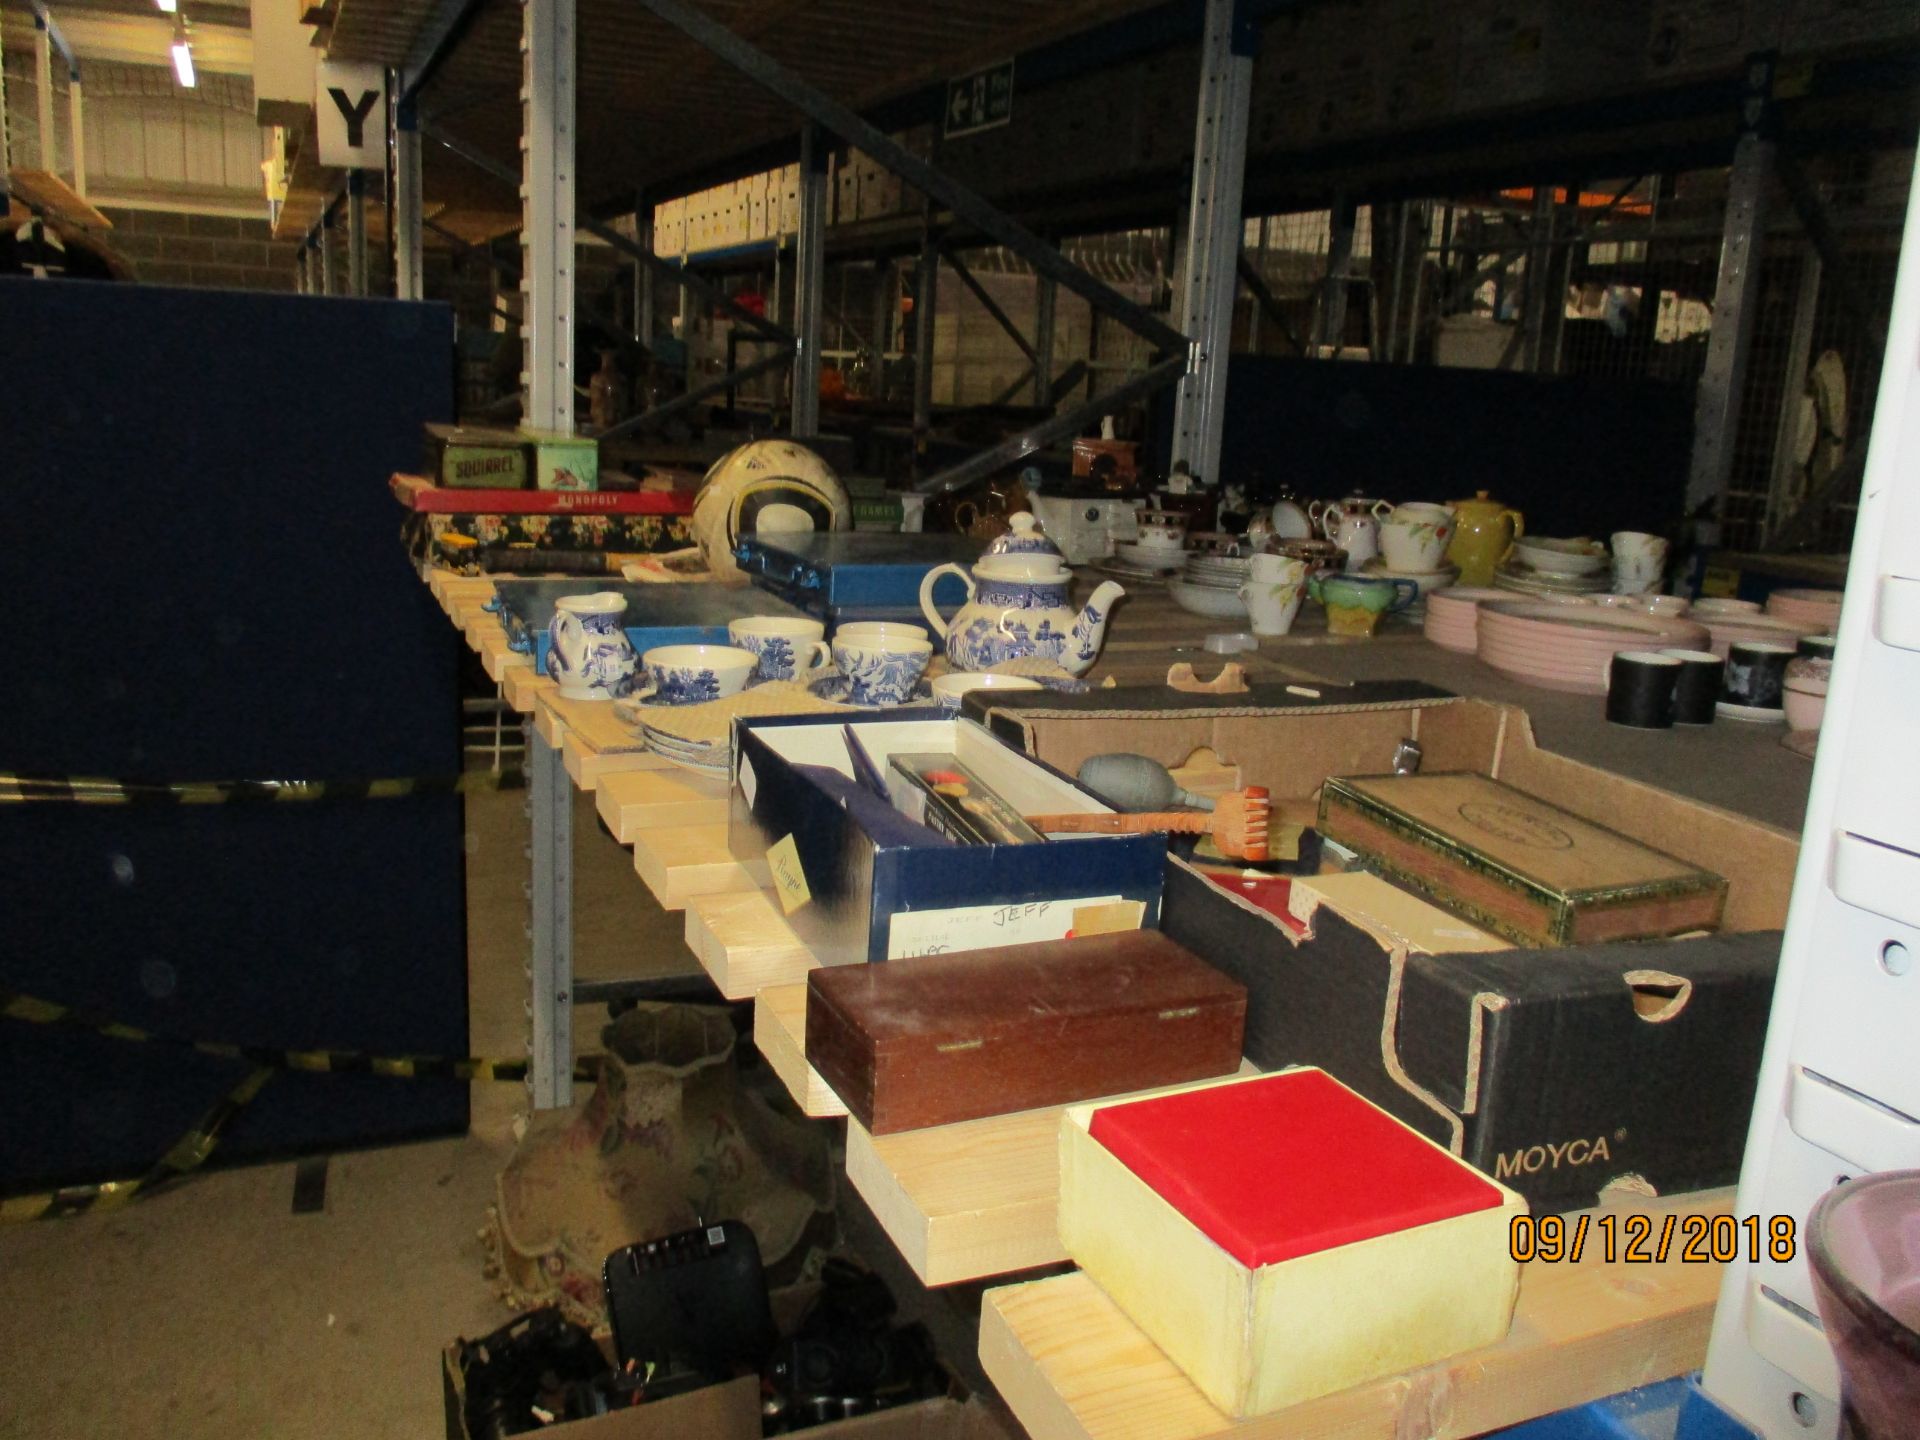 Contents to part rack - games, football, three tins of screws, blue and white ware,